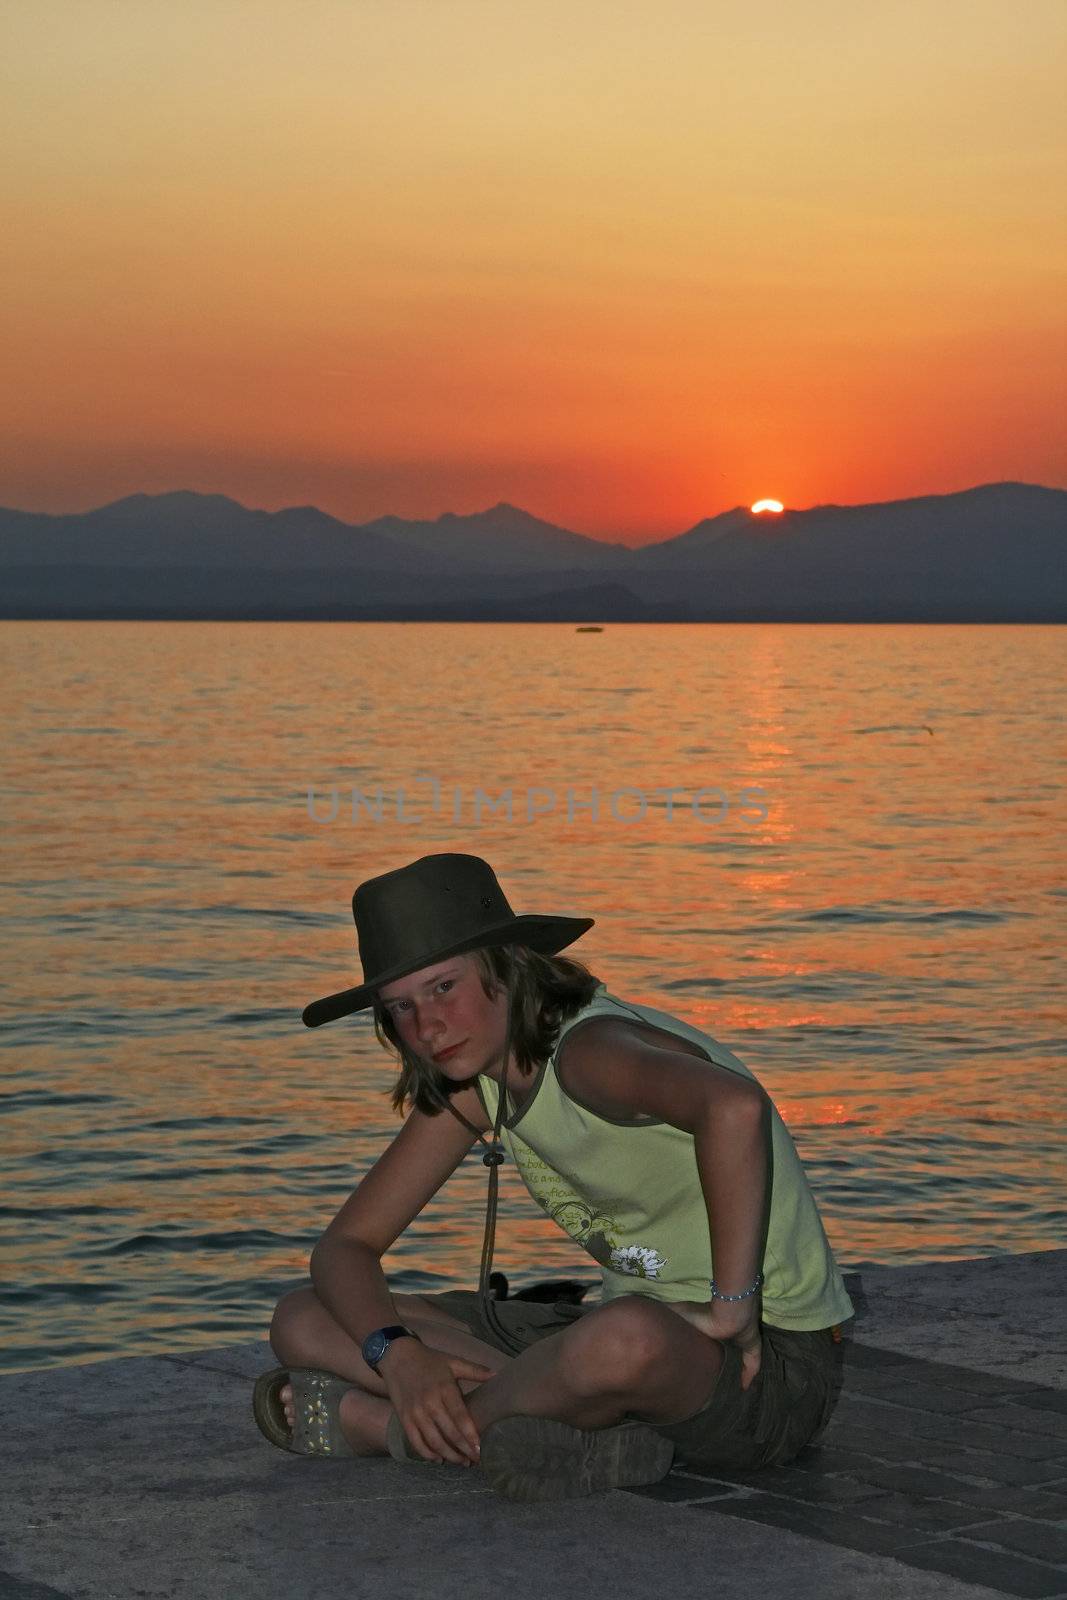 Indiana Jones at the Lake of Garda, Evening tendency. Lazise, Mädchen am See